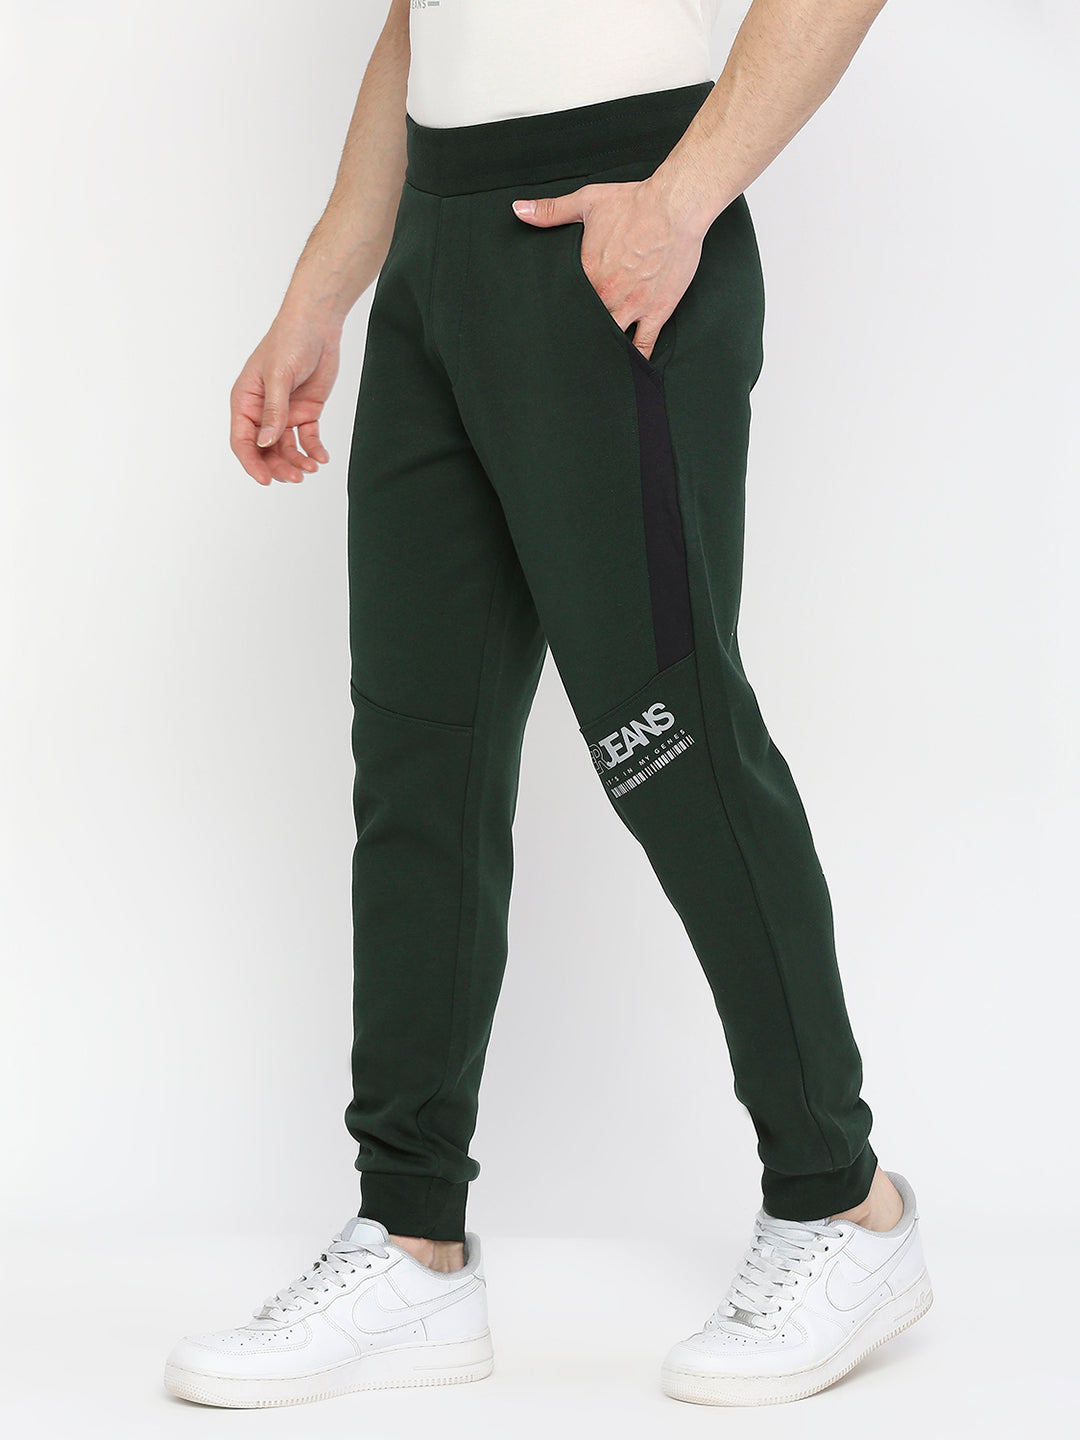 Cotton Track Pants For Women Regular Fit Lounge Pants Lowers Pack of 2 Bottle  Green  Wine  Cupid Clothings